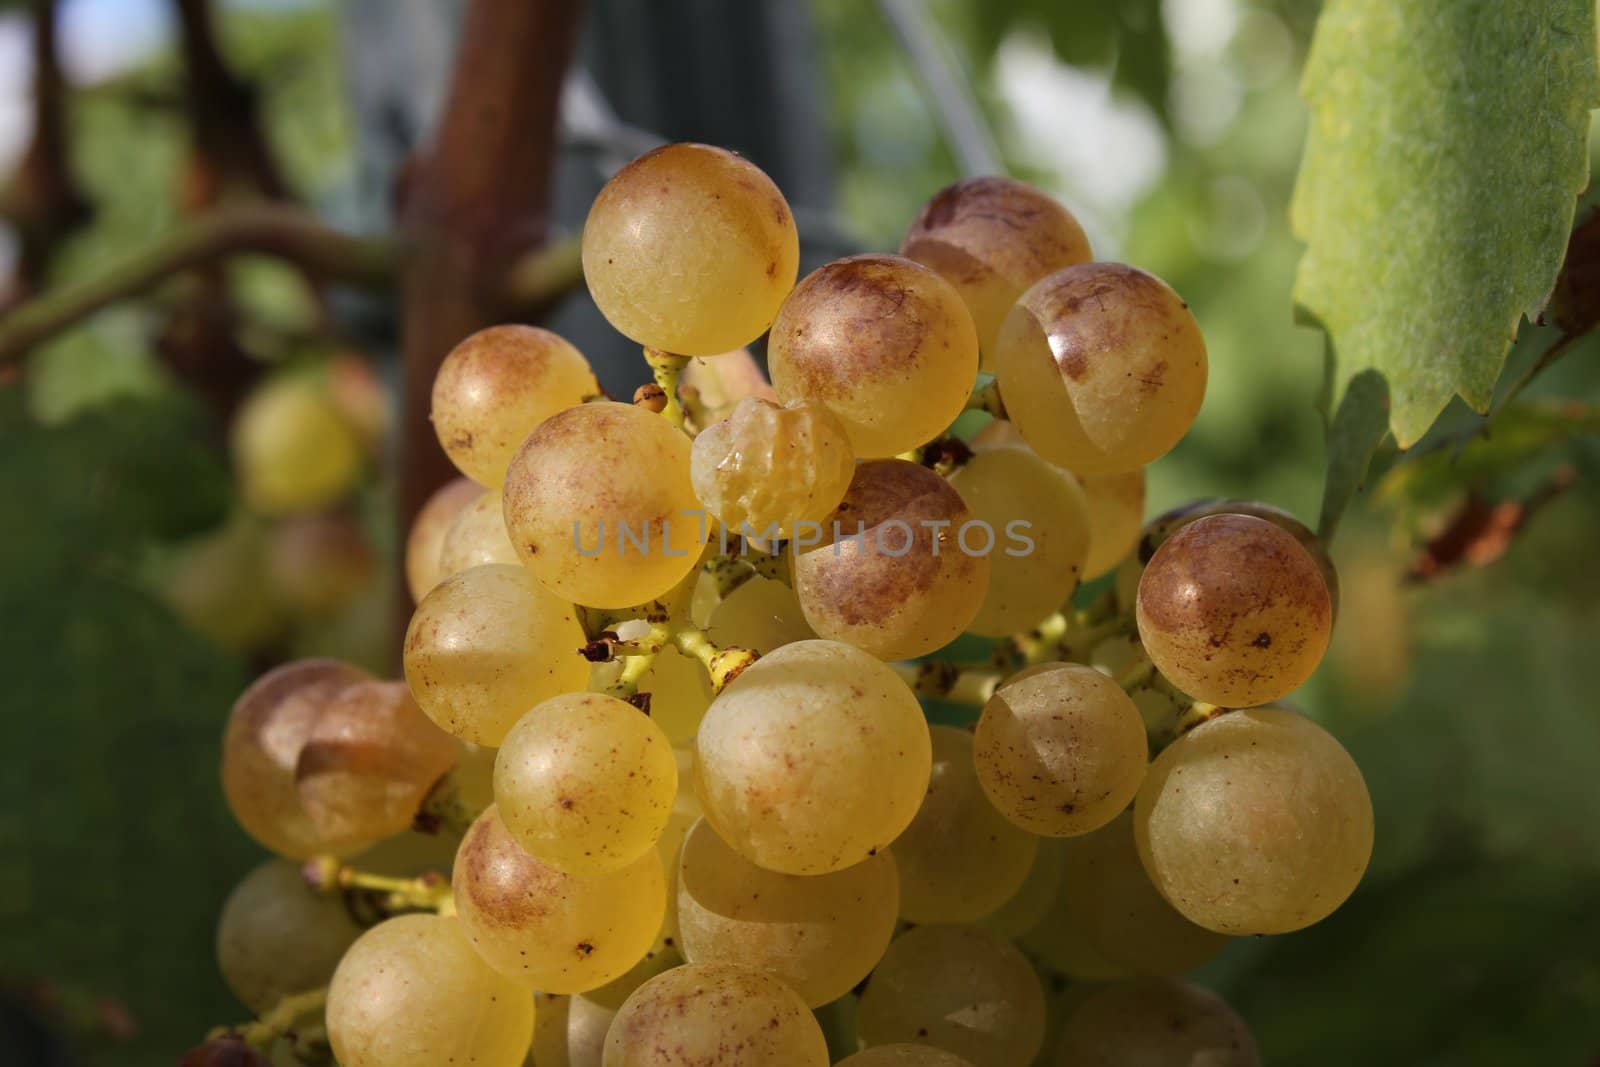 grapes green and brown